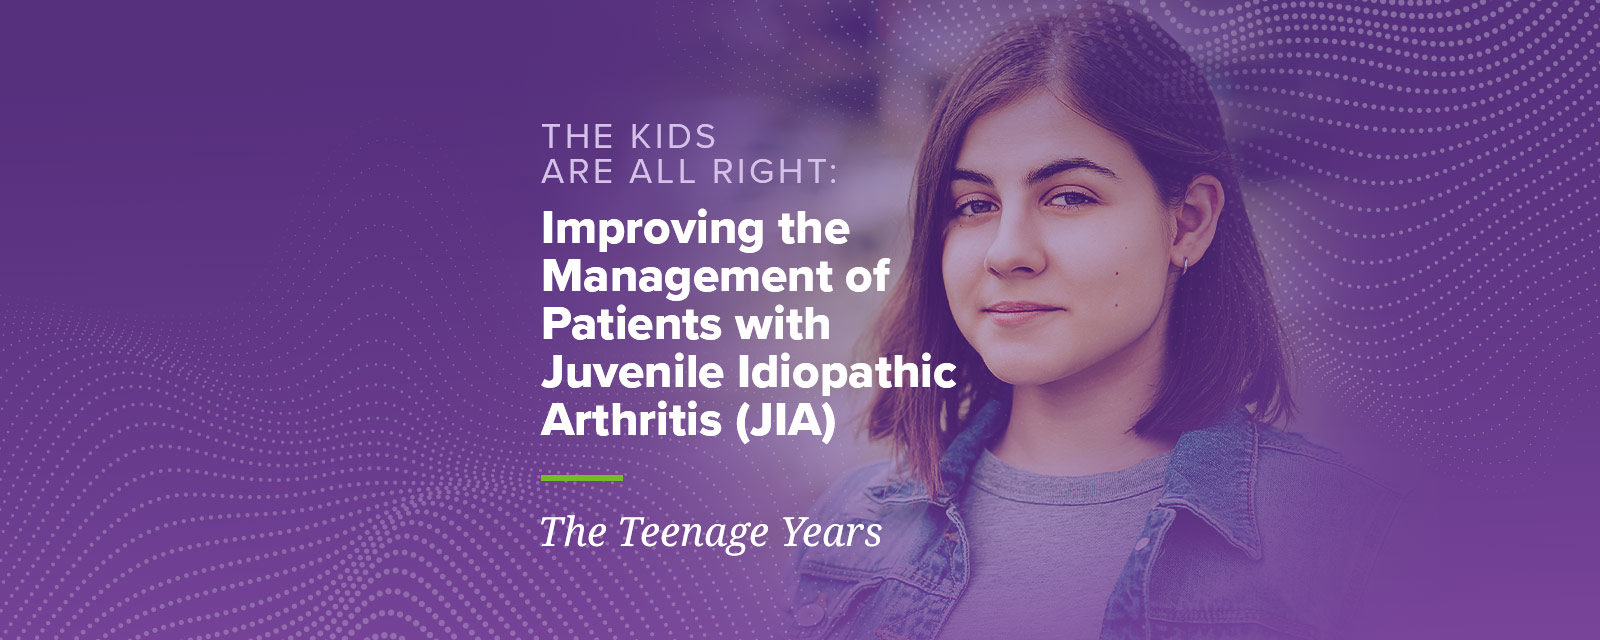 The Kids Are All Right: Improving the Management of Patients with Juvenile Idiopathic Arthritis The Teenage Years